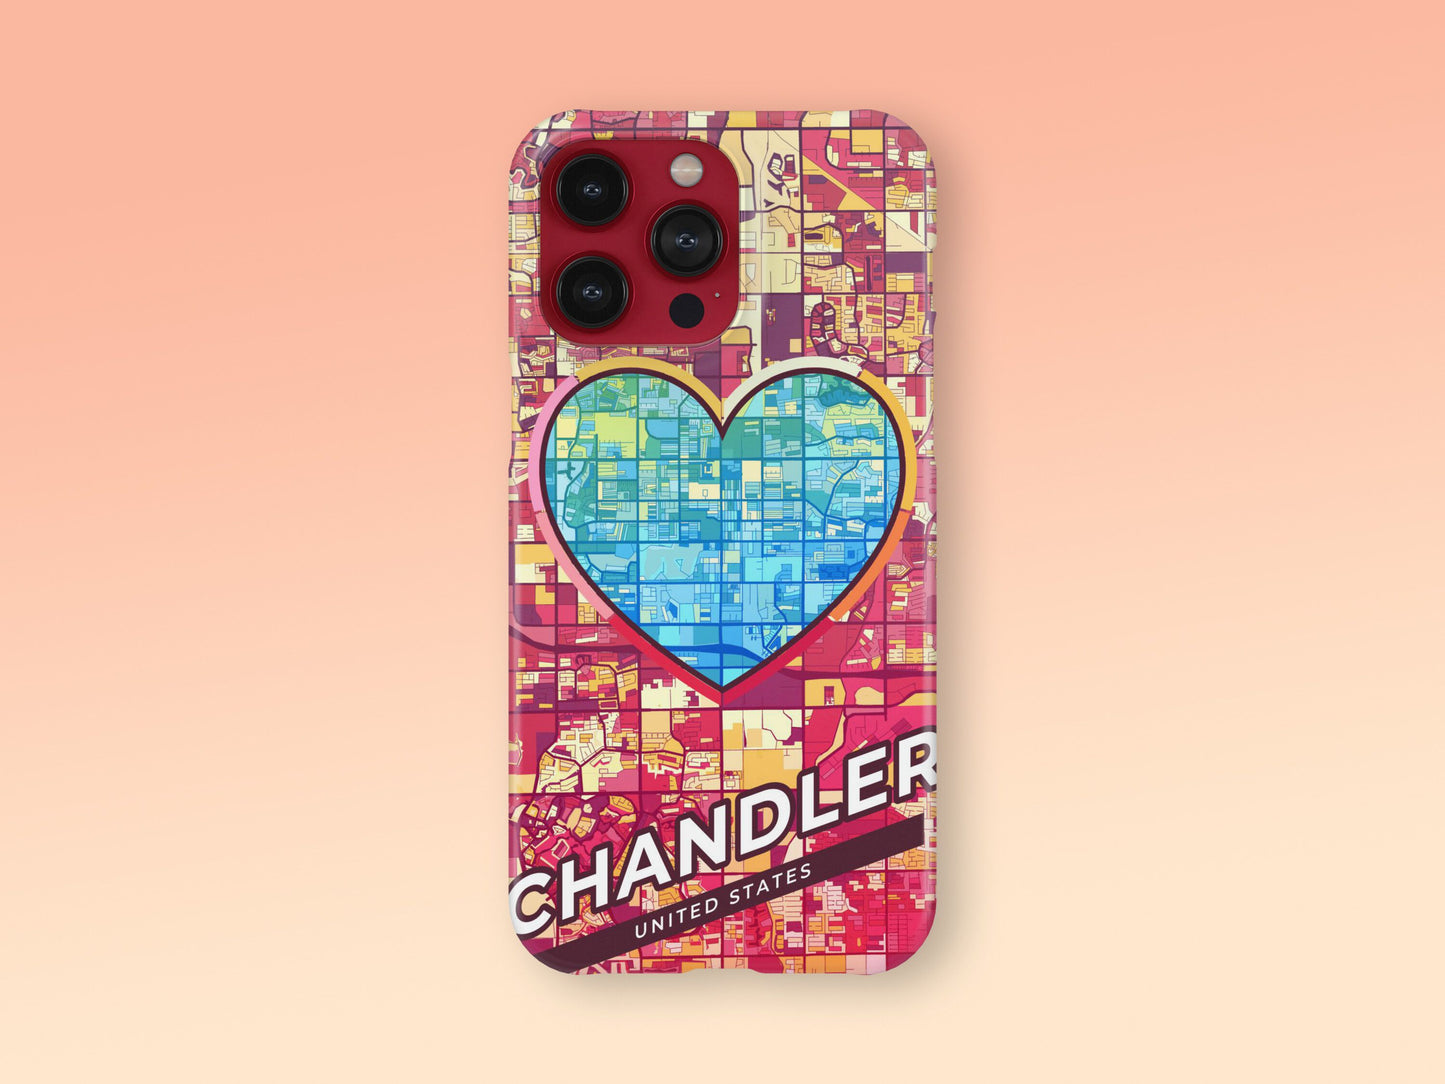 Chandler Arizona slim phone case with colorful icon. Birthday, wedding or housewarming gift. Couple match cases. 2